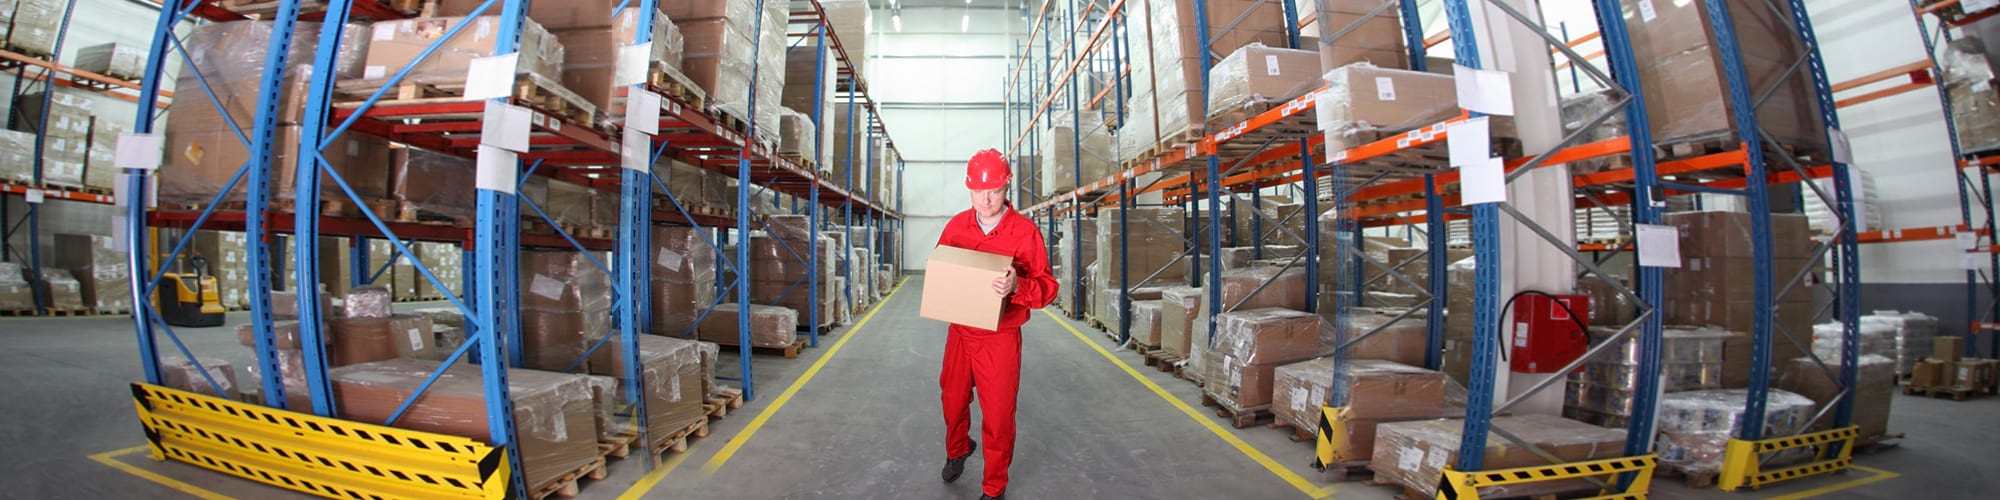 man holding a box in a warehouse